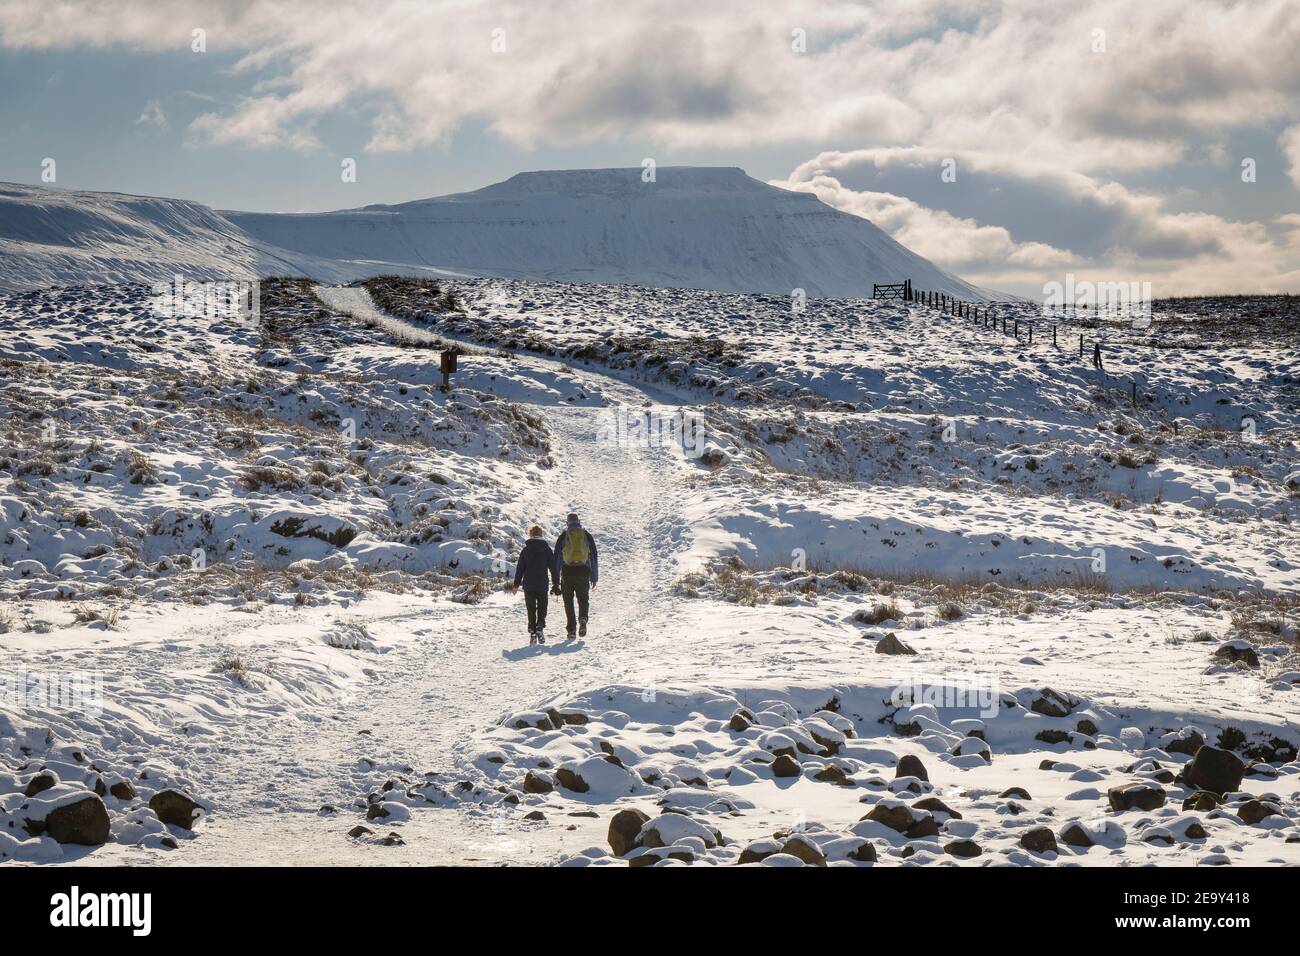 2 people walking in a snowy Yorkshire Dales landscape in winter. Taken at Blea Moor, Ribblehead, with a snow covered Ingleborough in the background Stock Photo